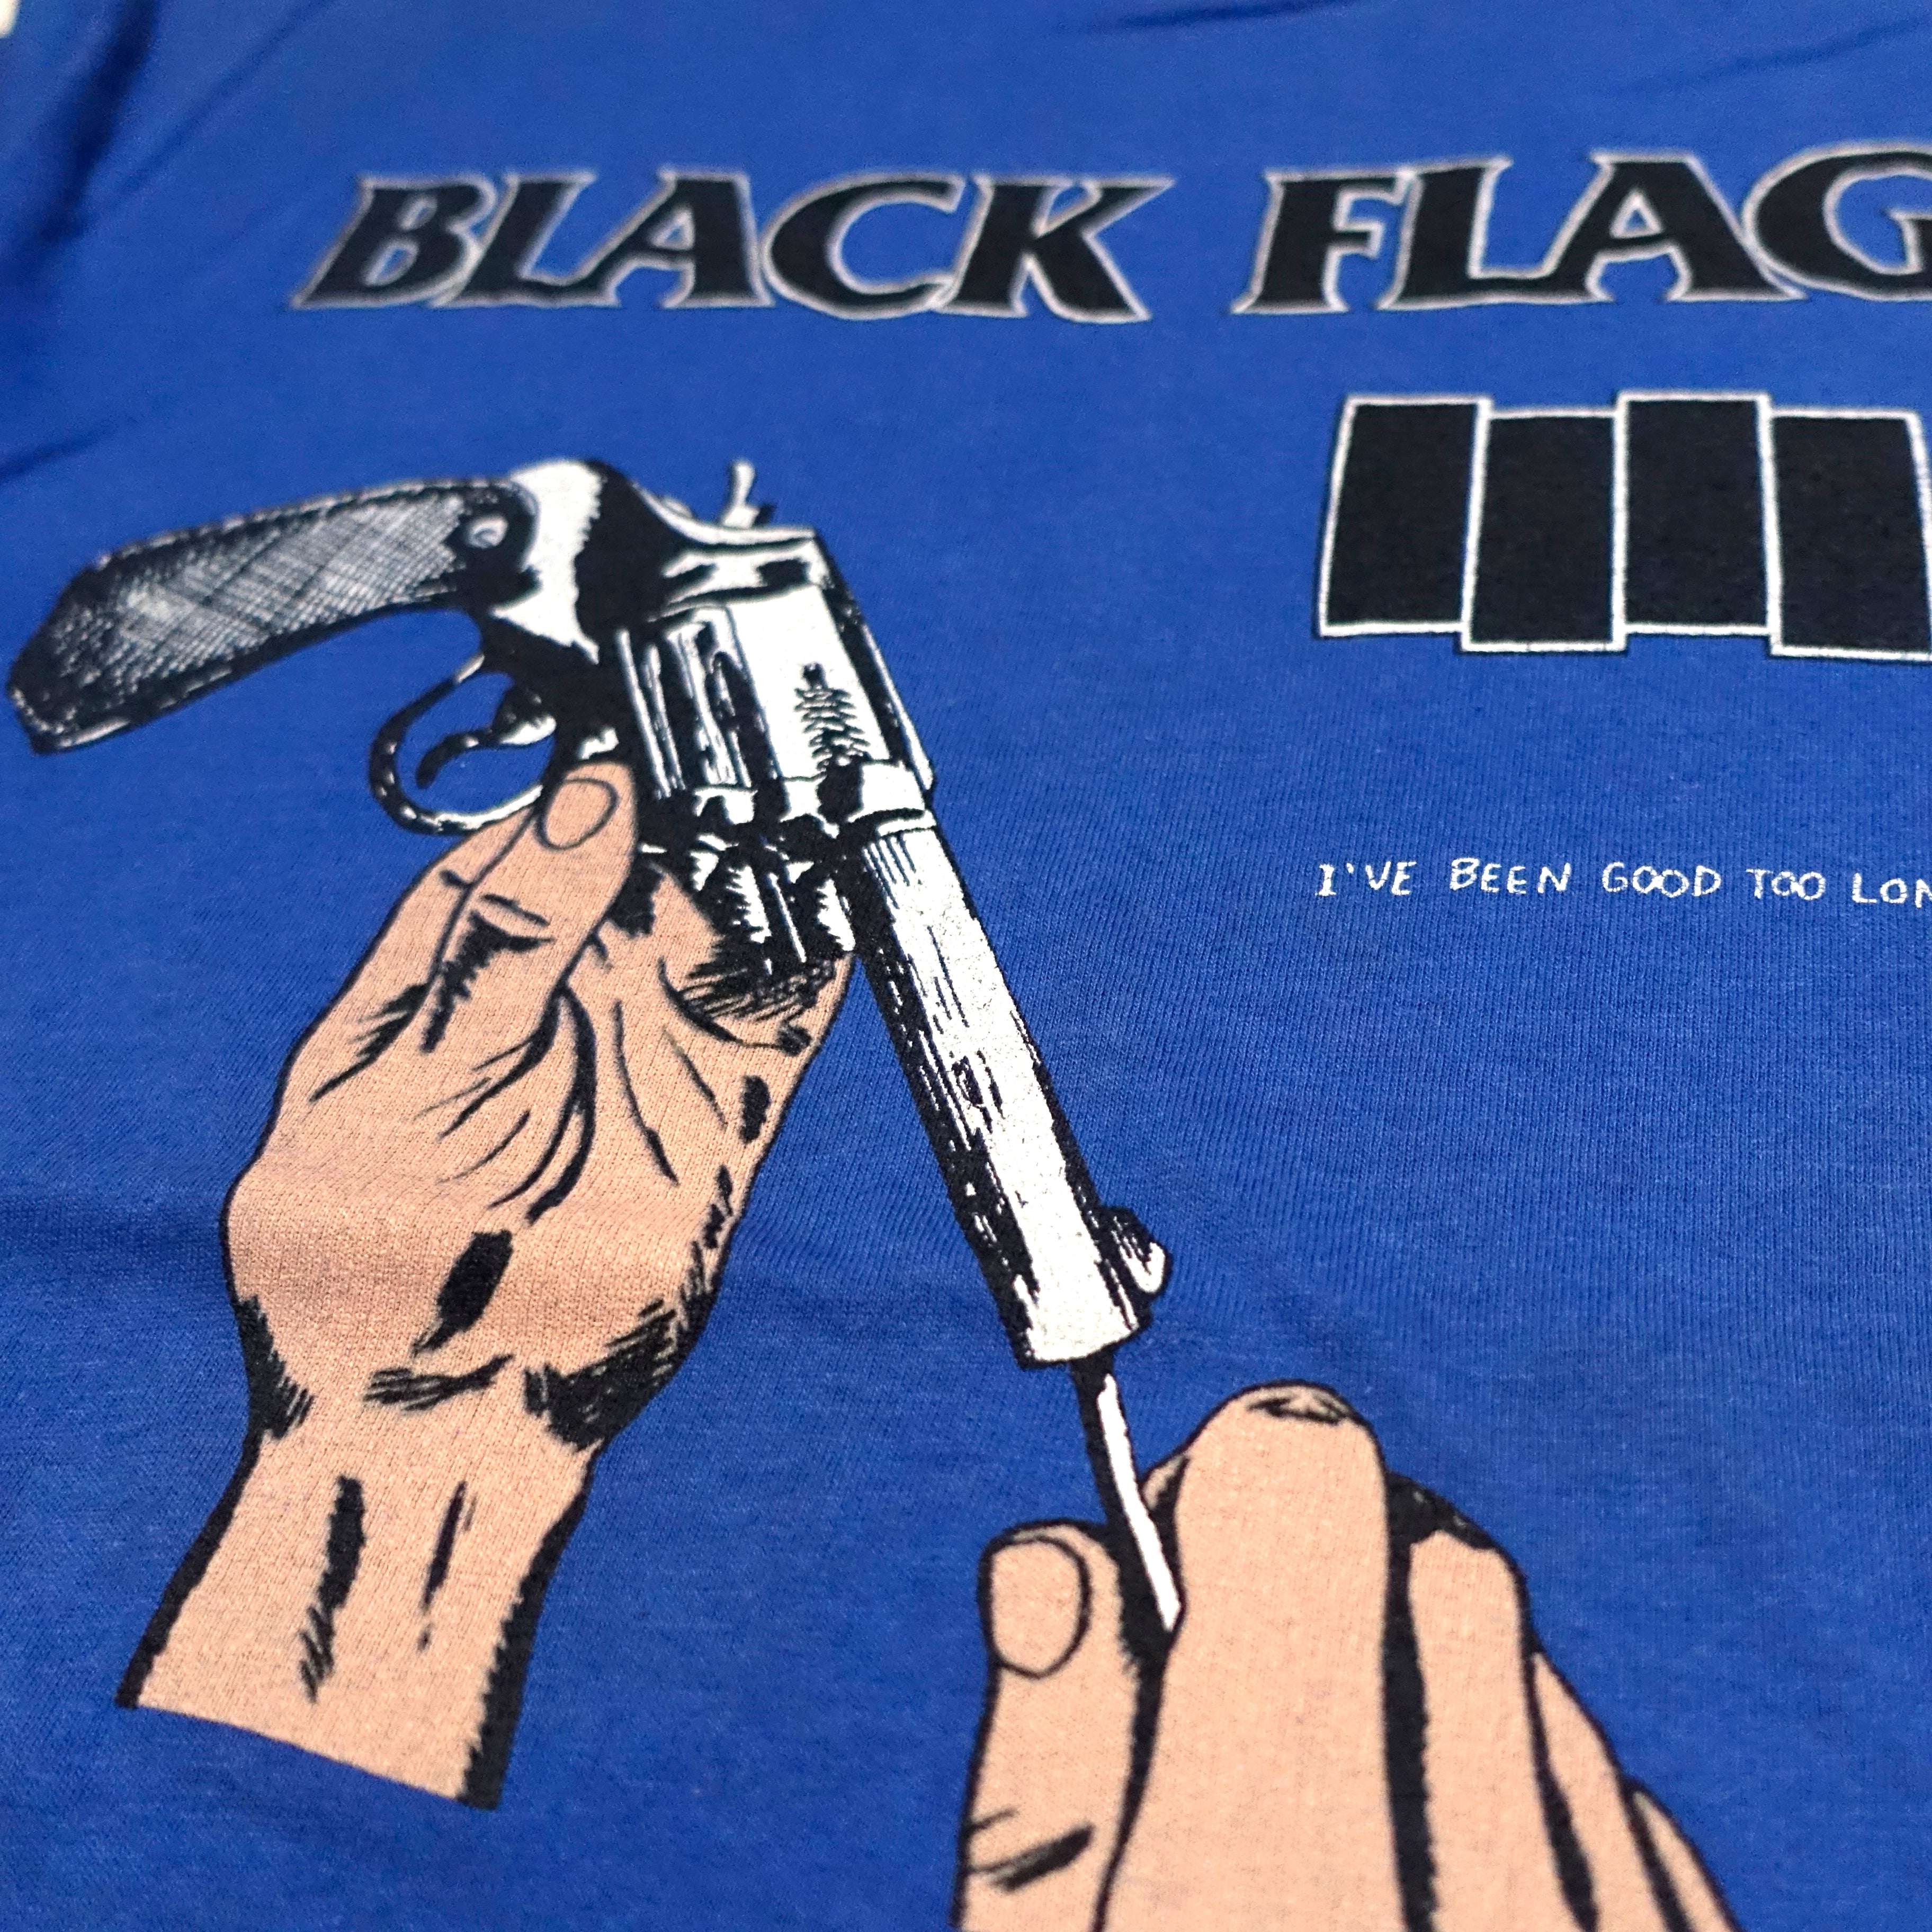 Black Flag - I've Been Good For Too Long In My Head 1986 Tour Shirt Size Large / Medium